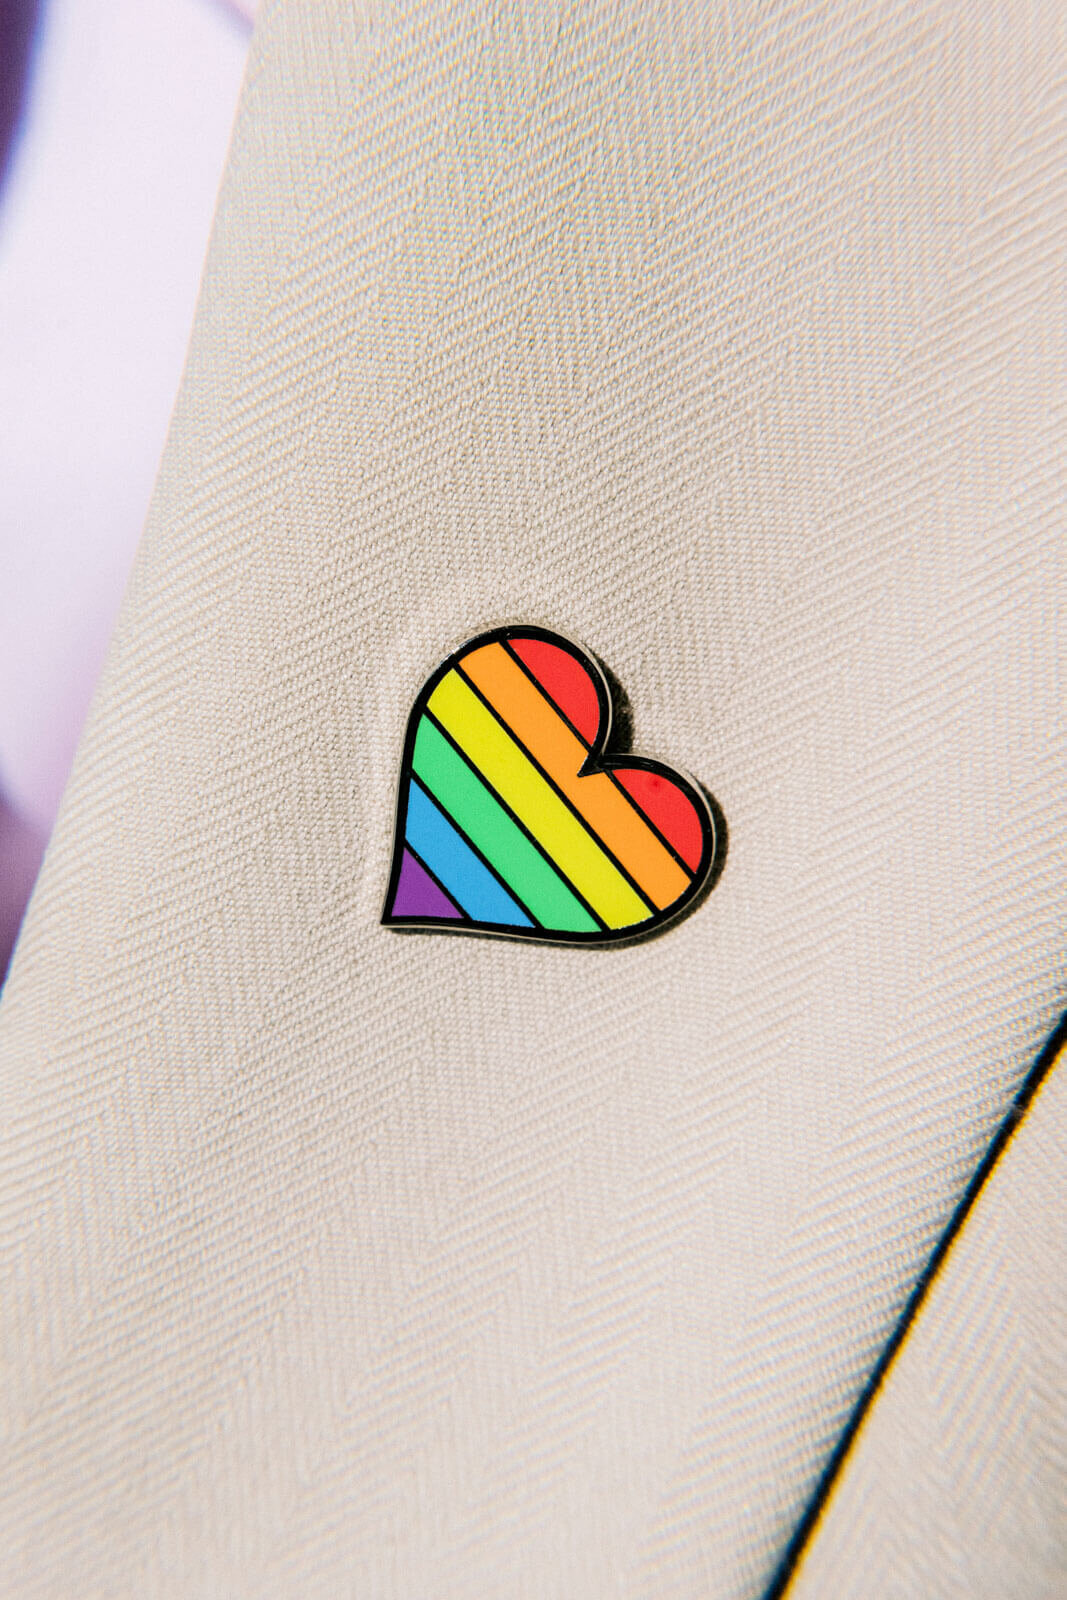 A multi-colored heart-shaped pin on the groom's suit. NYC City Hall Elopement Image by Jenny Fu Studio